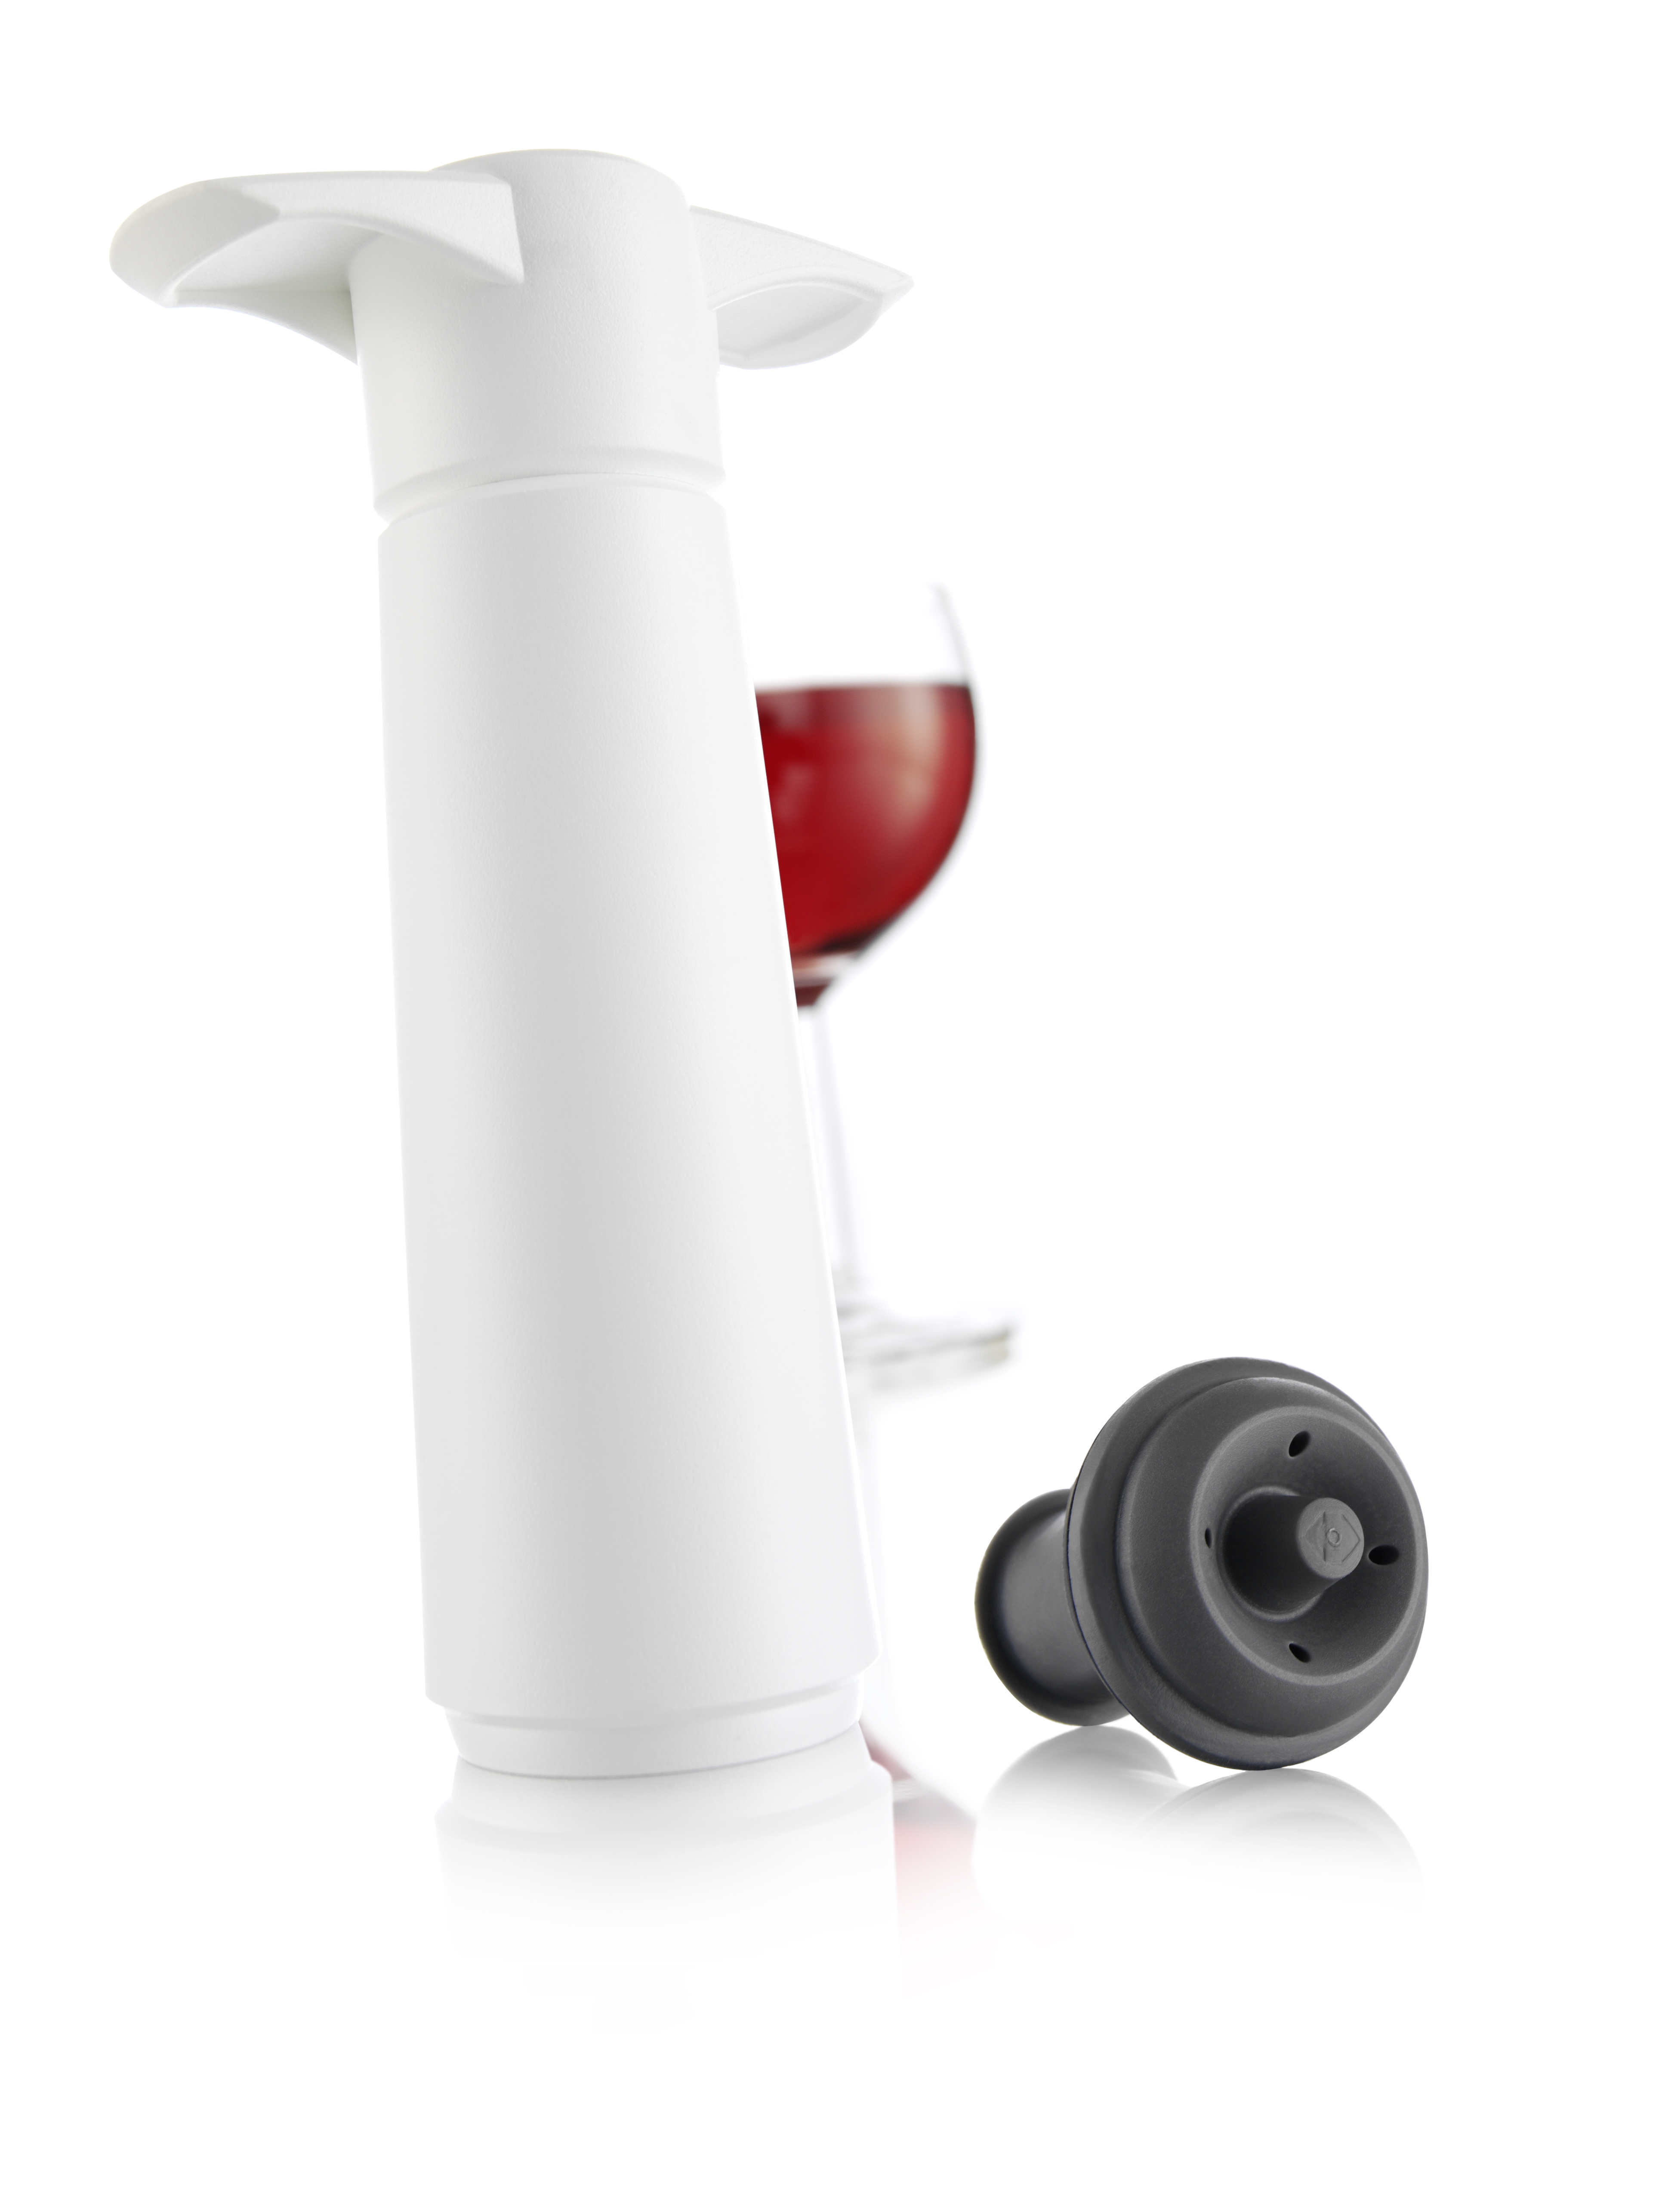 Picture of Vacu Vin 8542606 Wine Saver Blister, White - 1 Pump & 1 Stopper